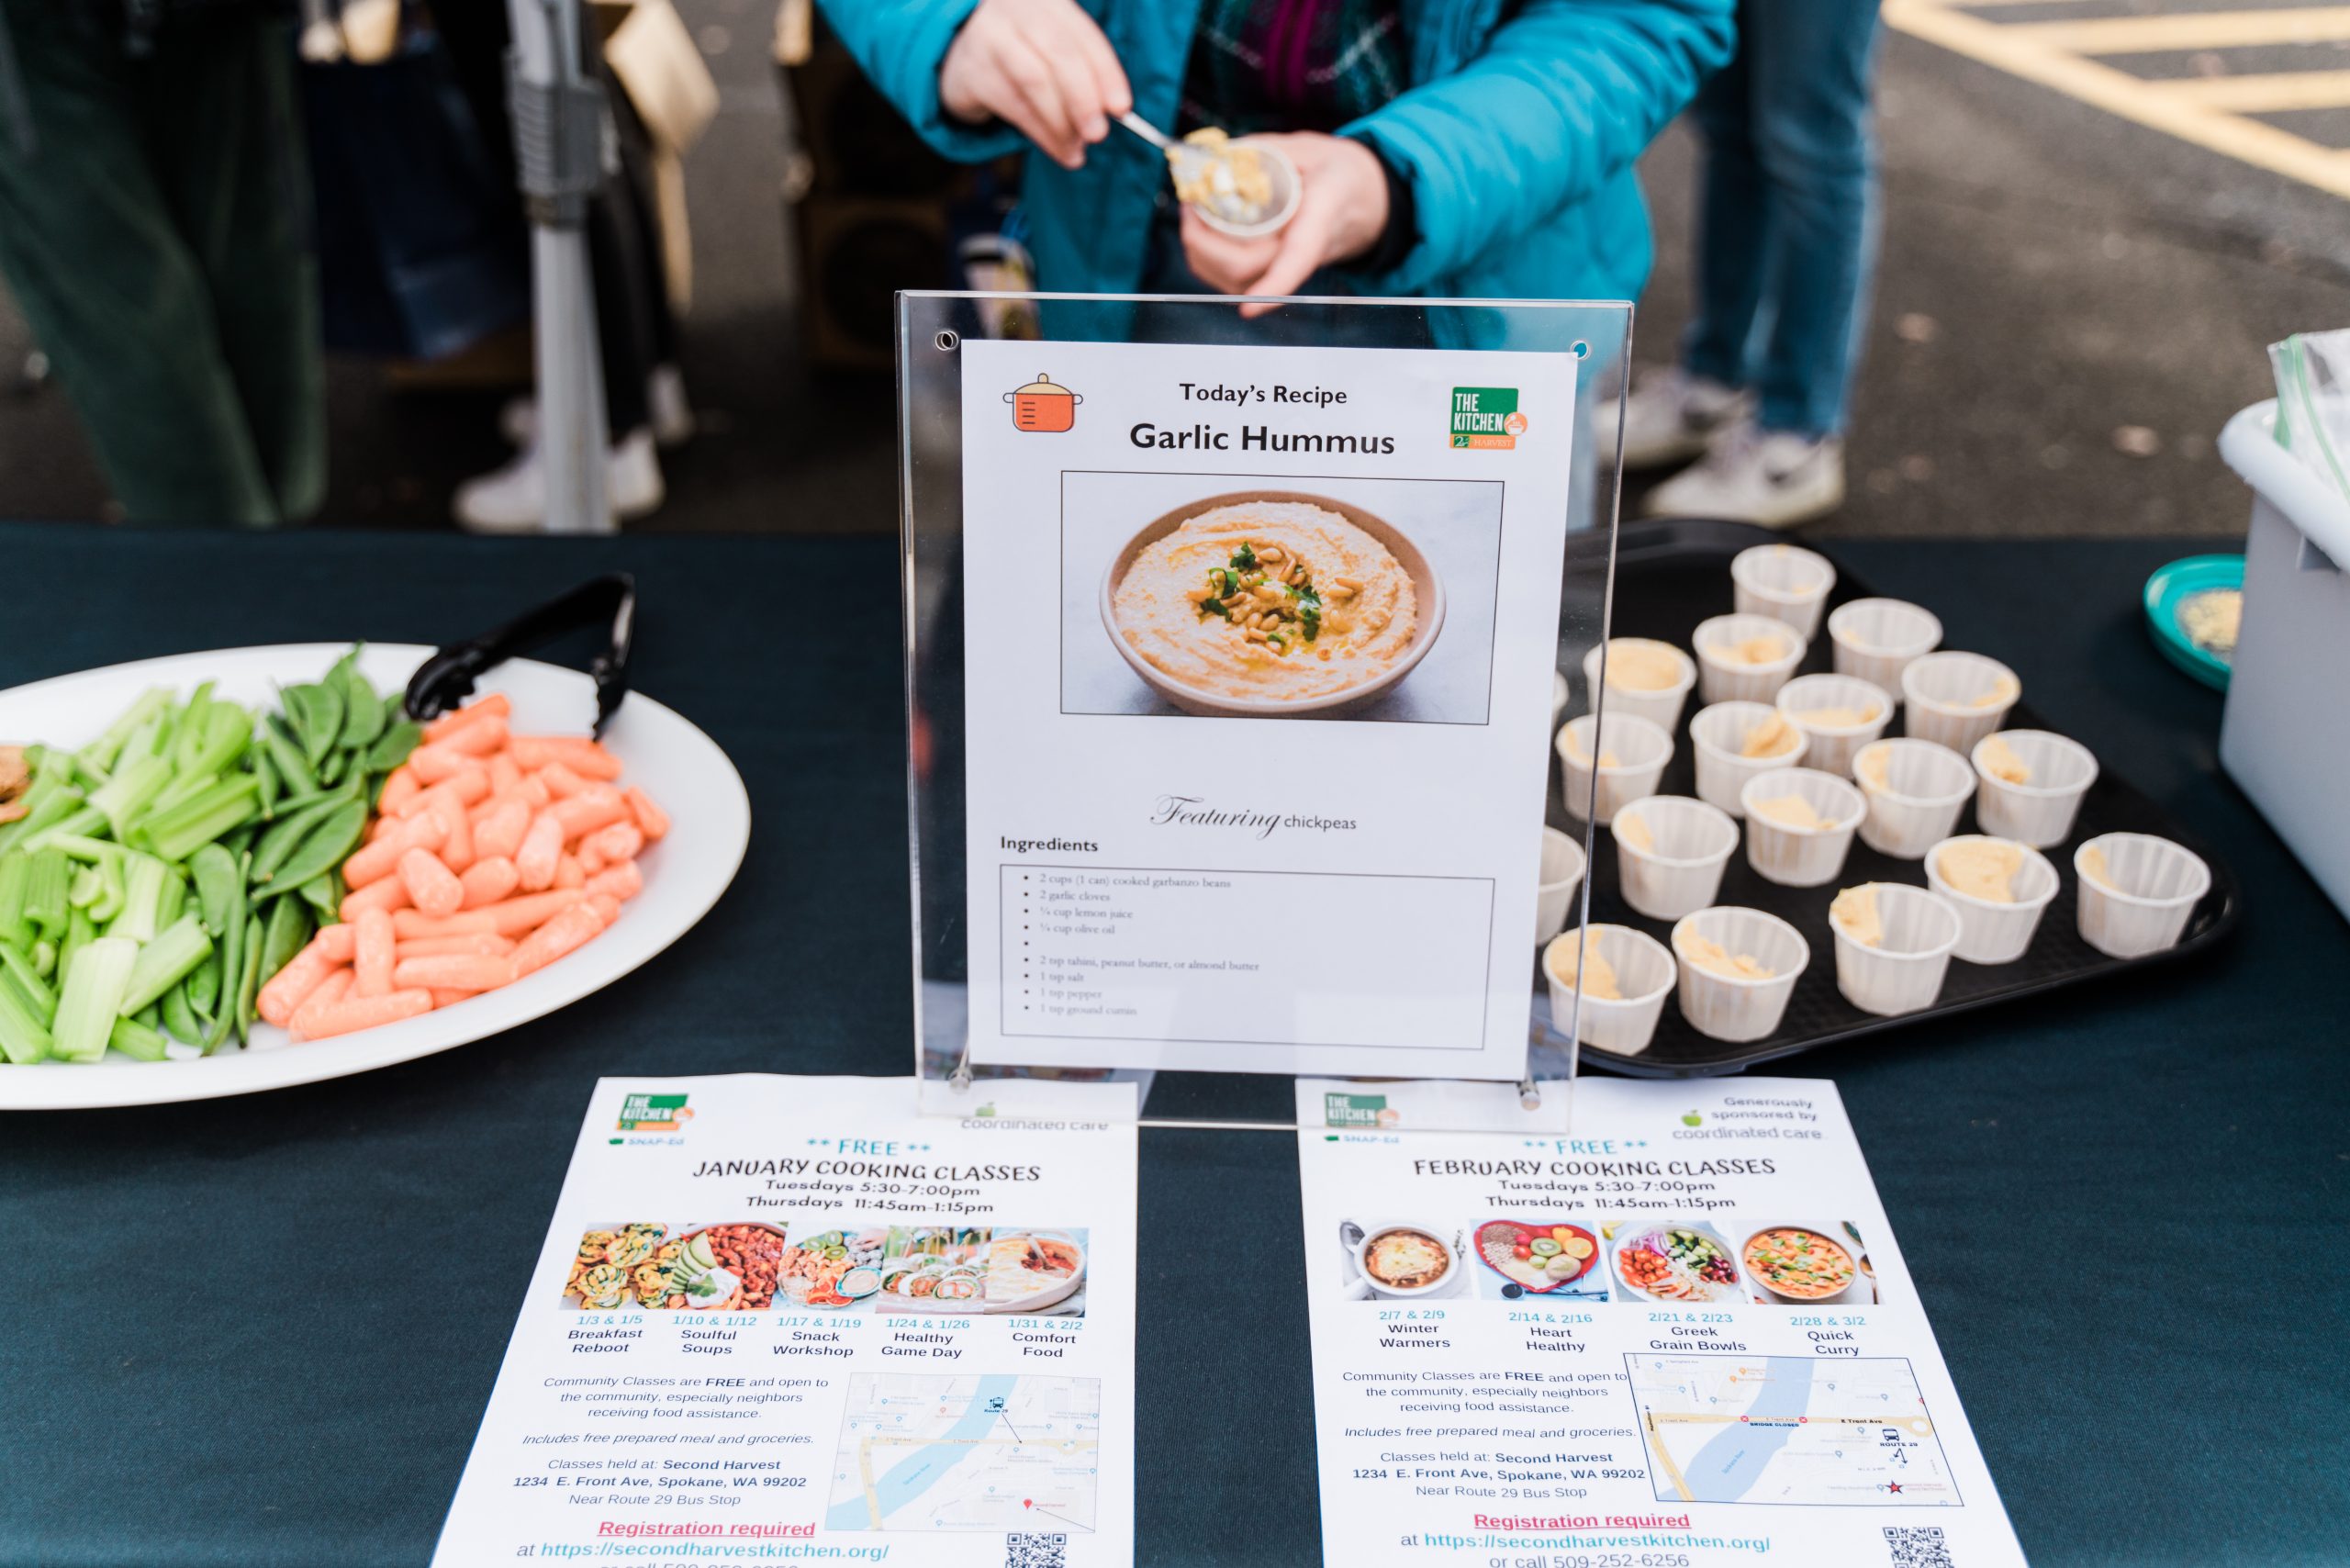 Hummus samples offered at a Mobile Market event